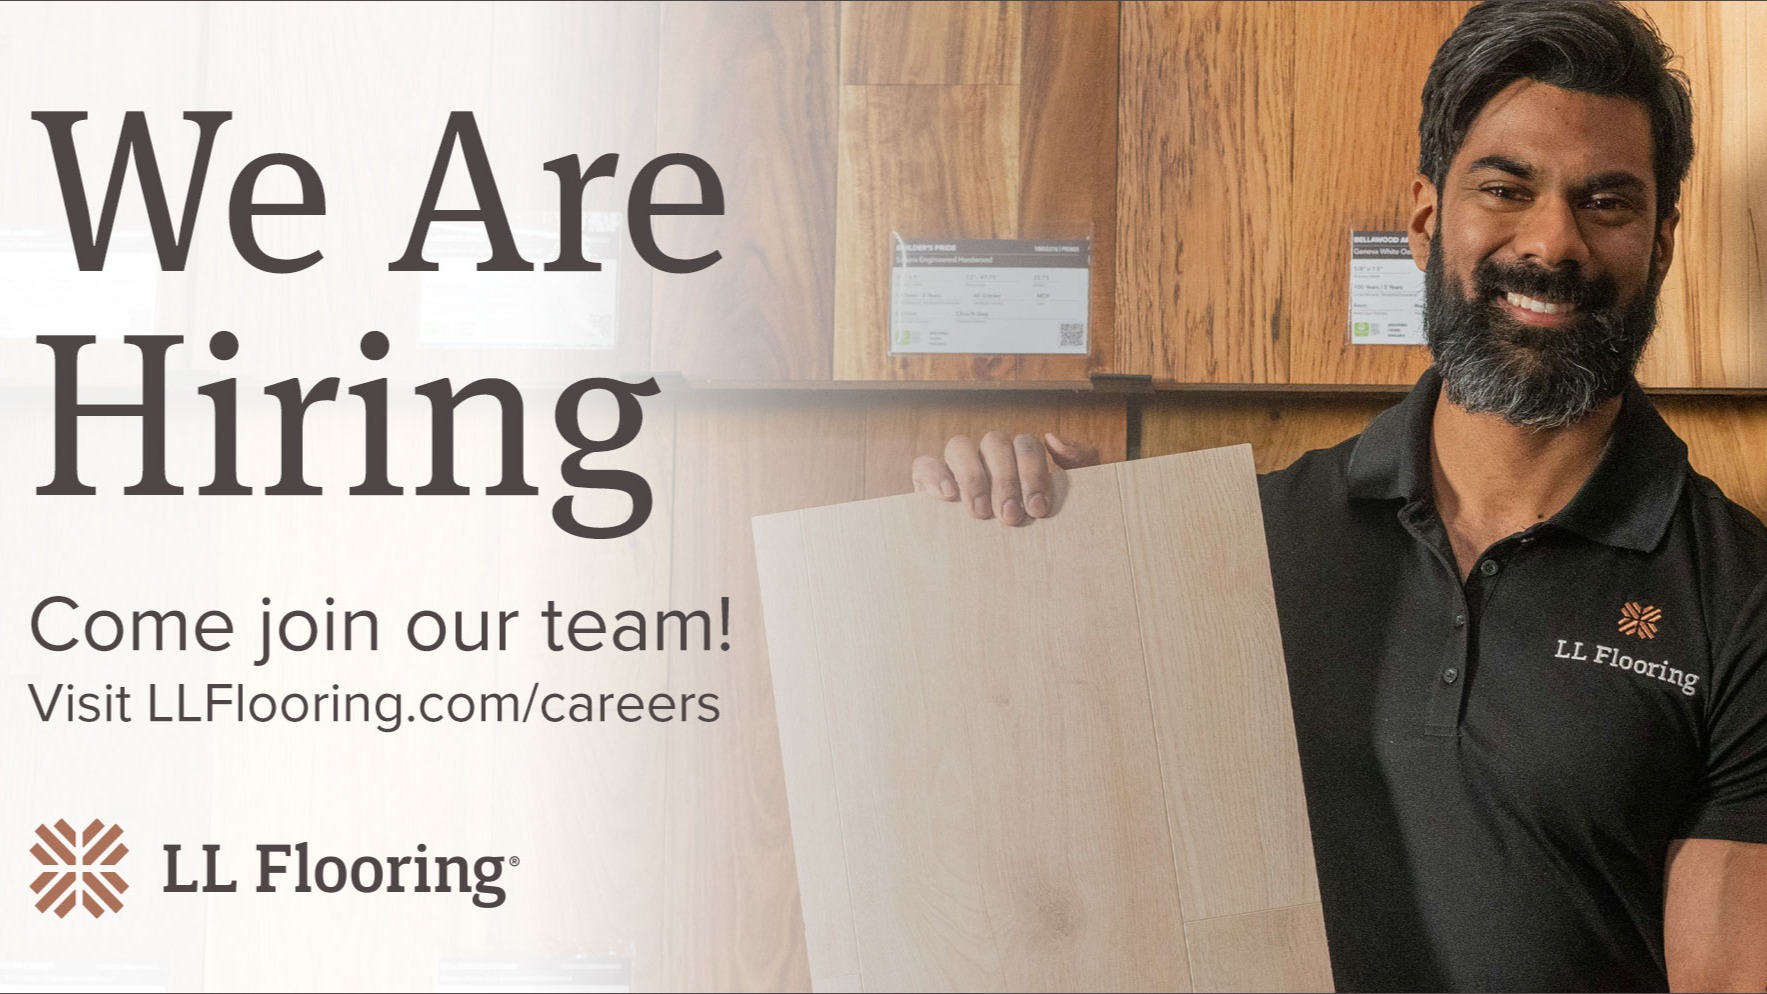 We are Hiring. Come join our team! Visit llflooring.com/careers. LL Flooring. Man holding flooring sample.